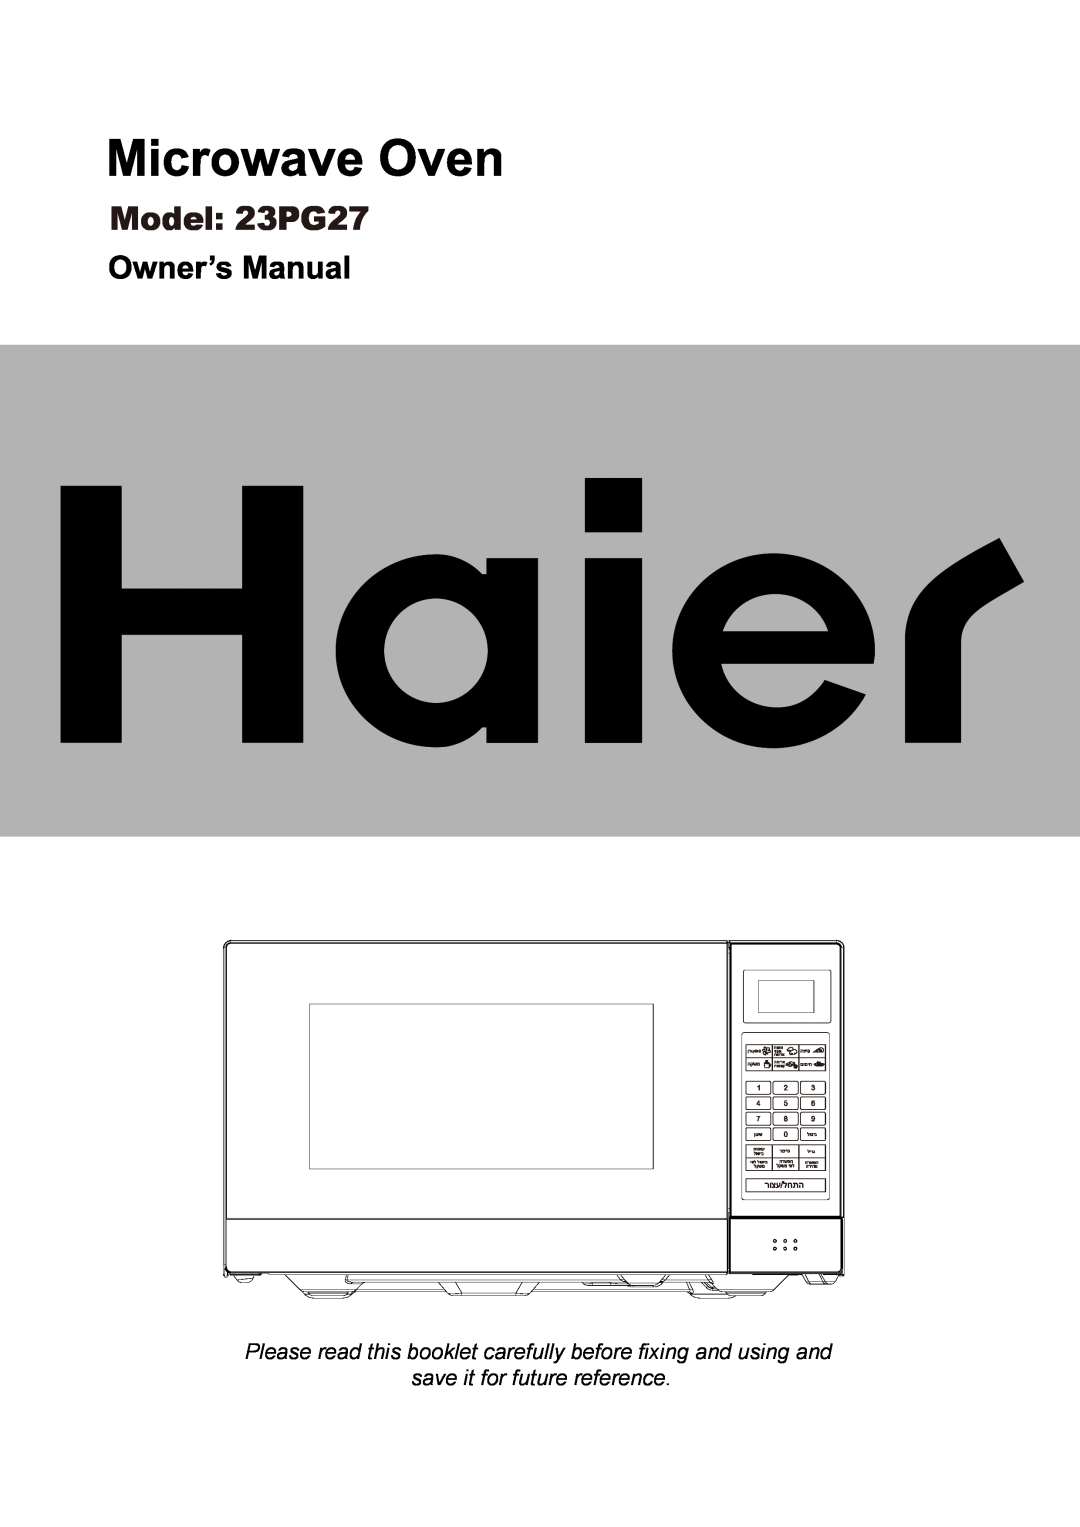 Haier manual Model 23PG27, Please read this booklet carefully before fixing and using and, save it for future reference 